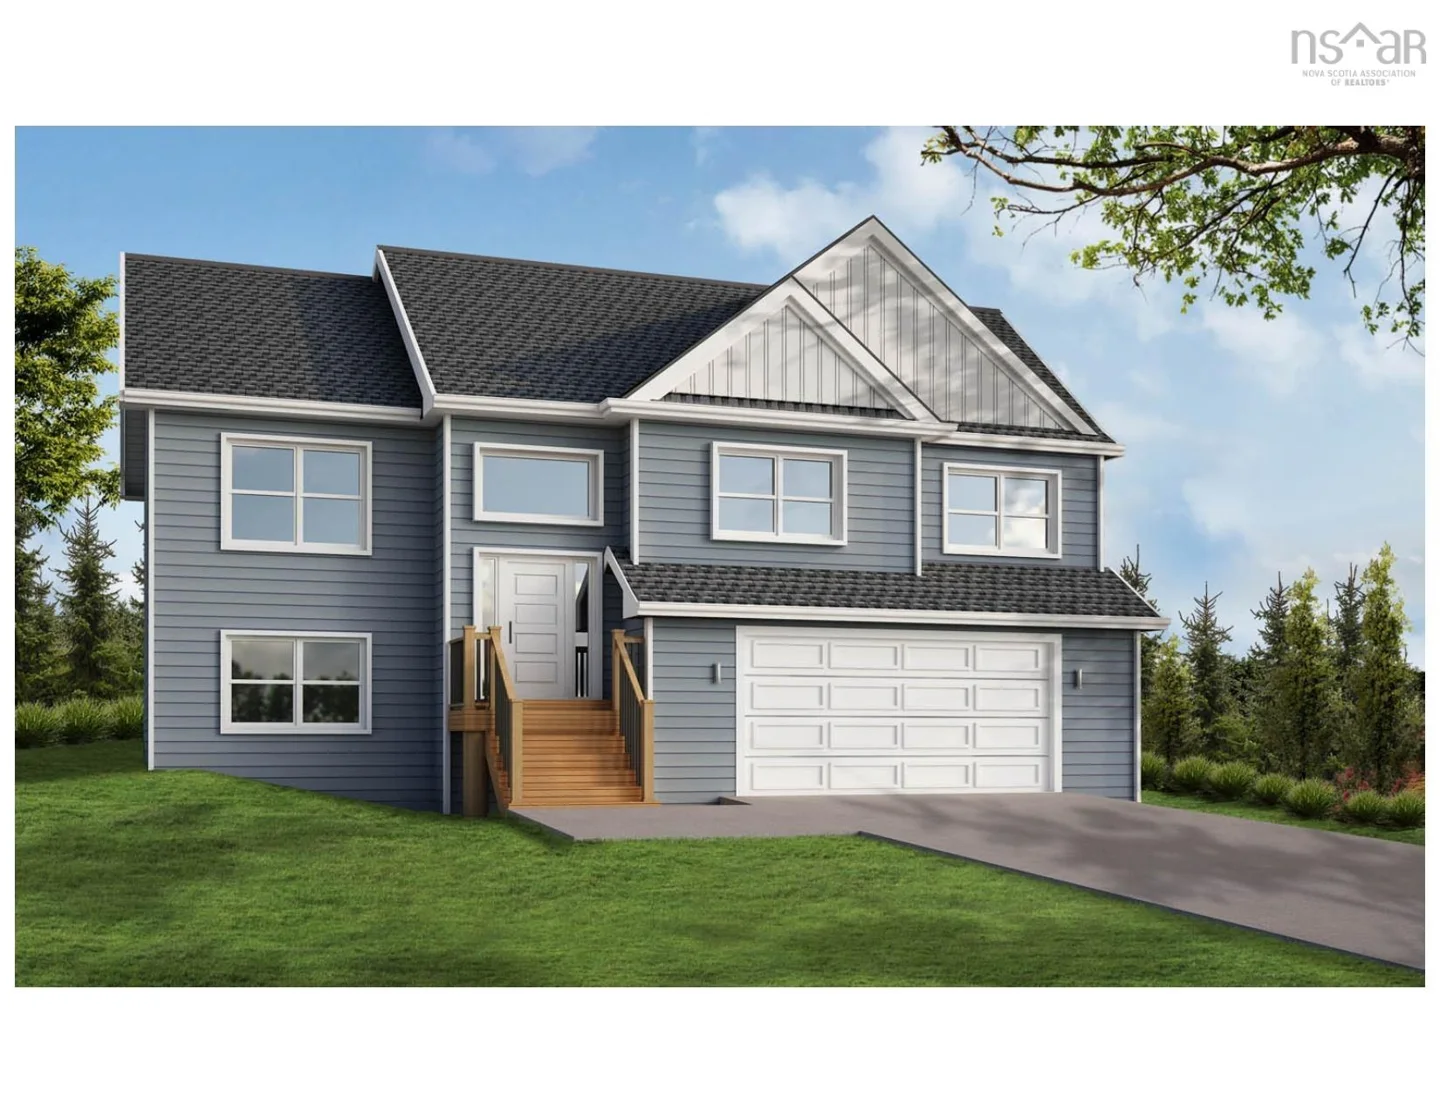 Live Near the Ocean in a New Home in Tantallon, NS